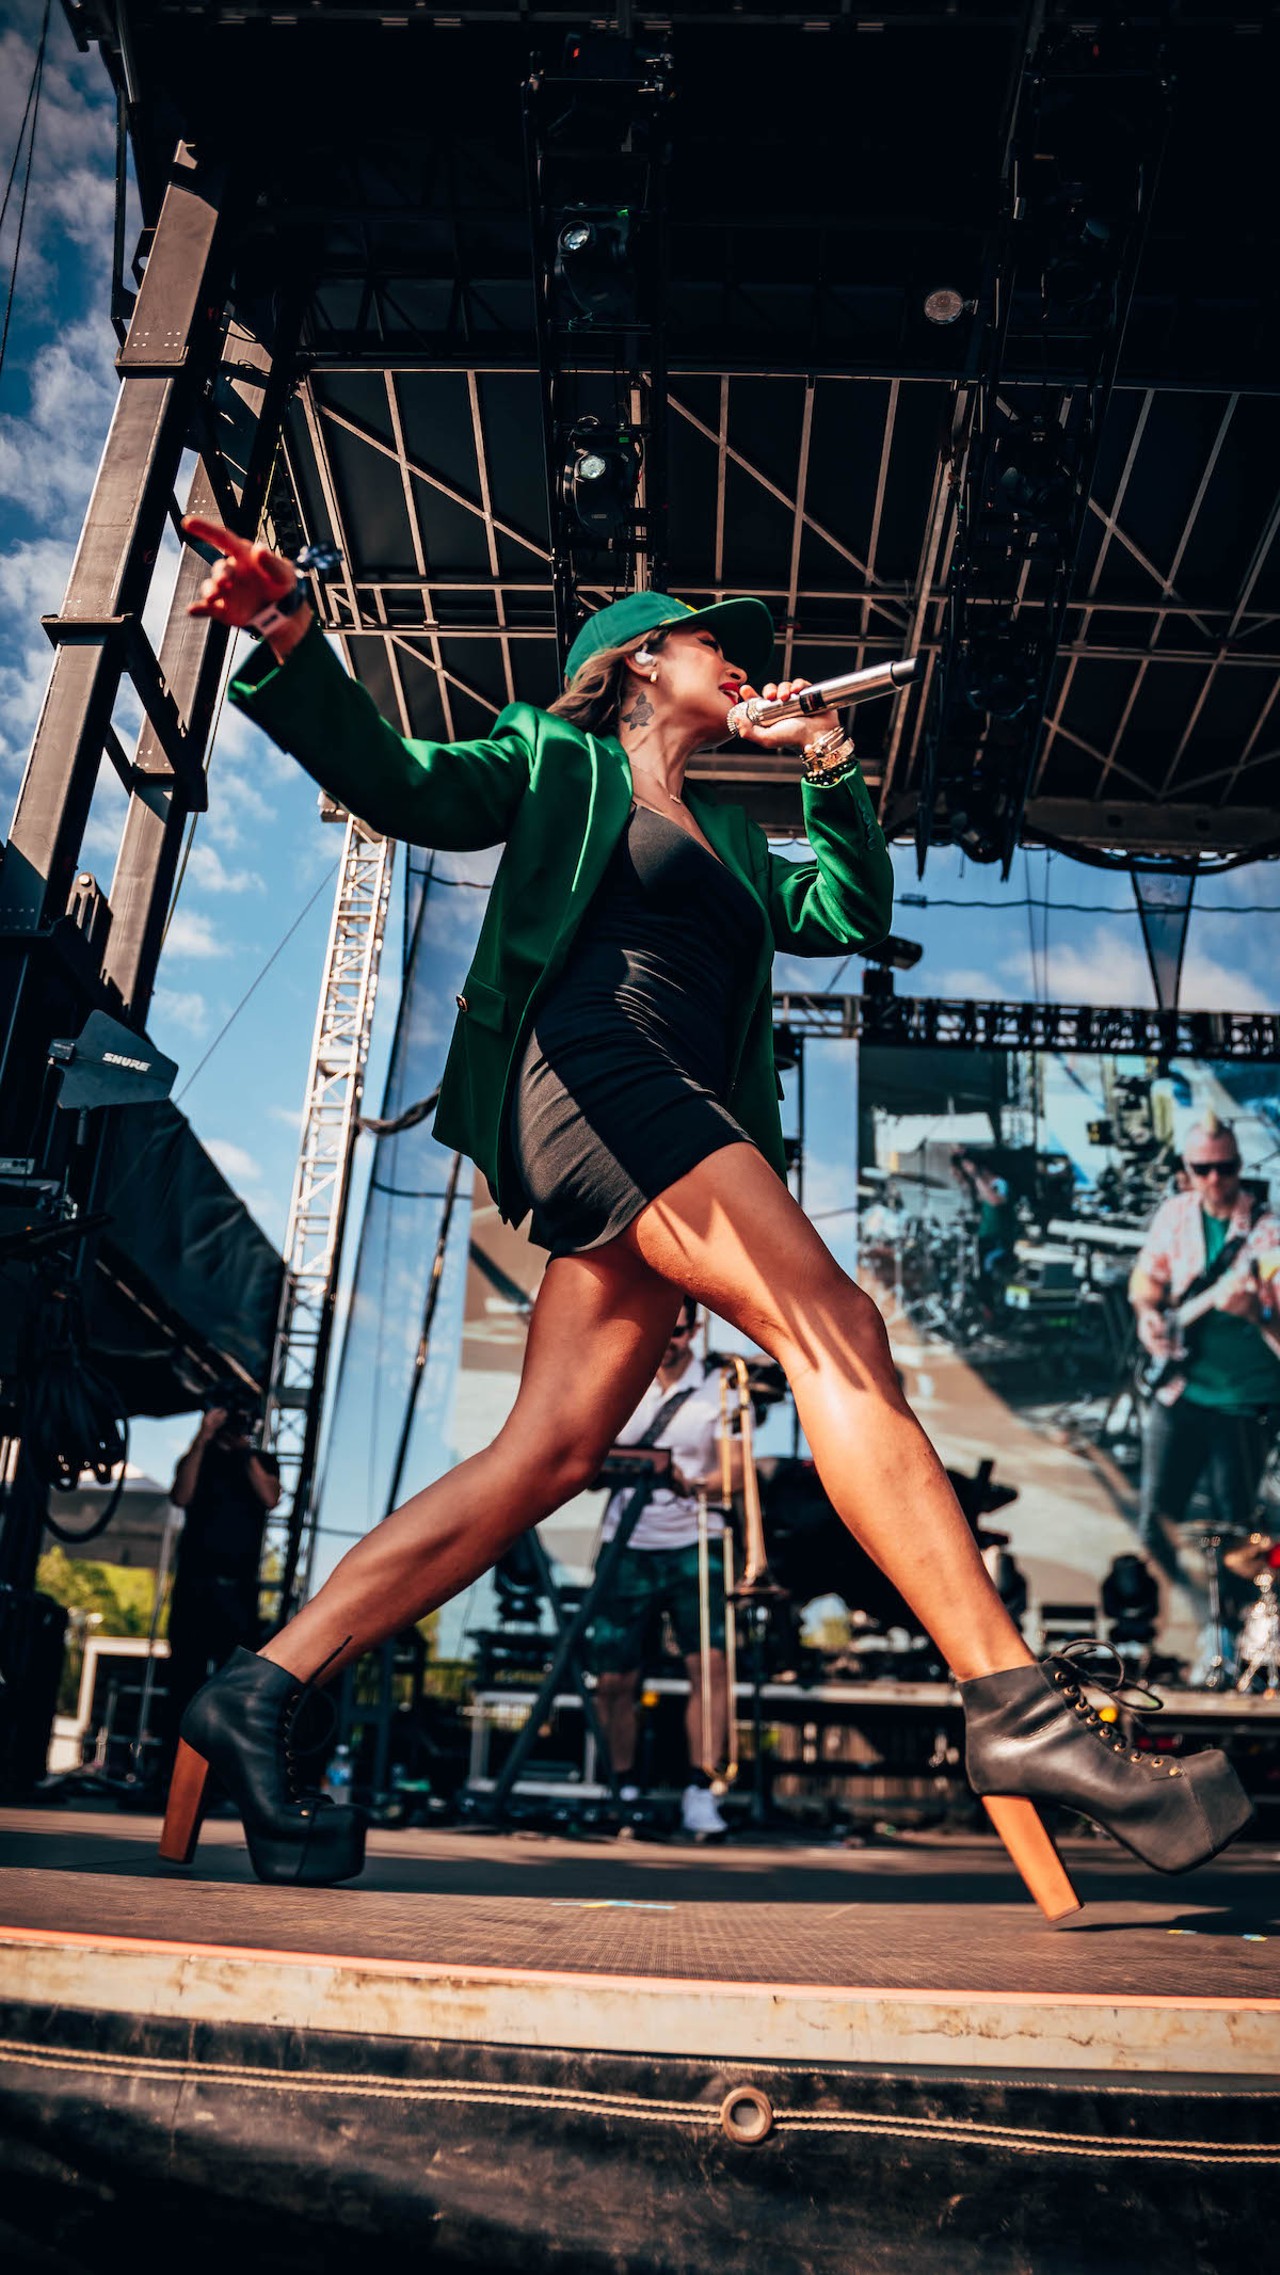 Photos: Reggae Rise Up stages another successful run at St. Pete's Vinoy Park